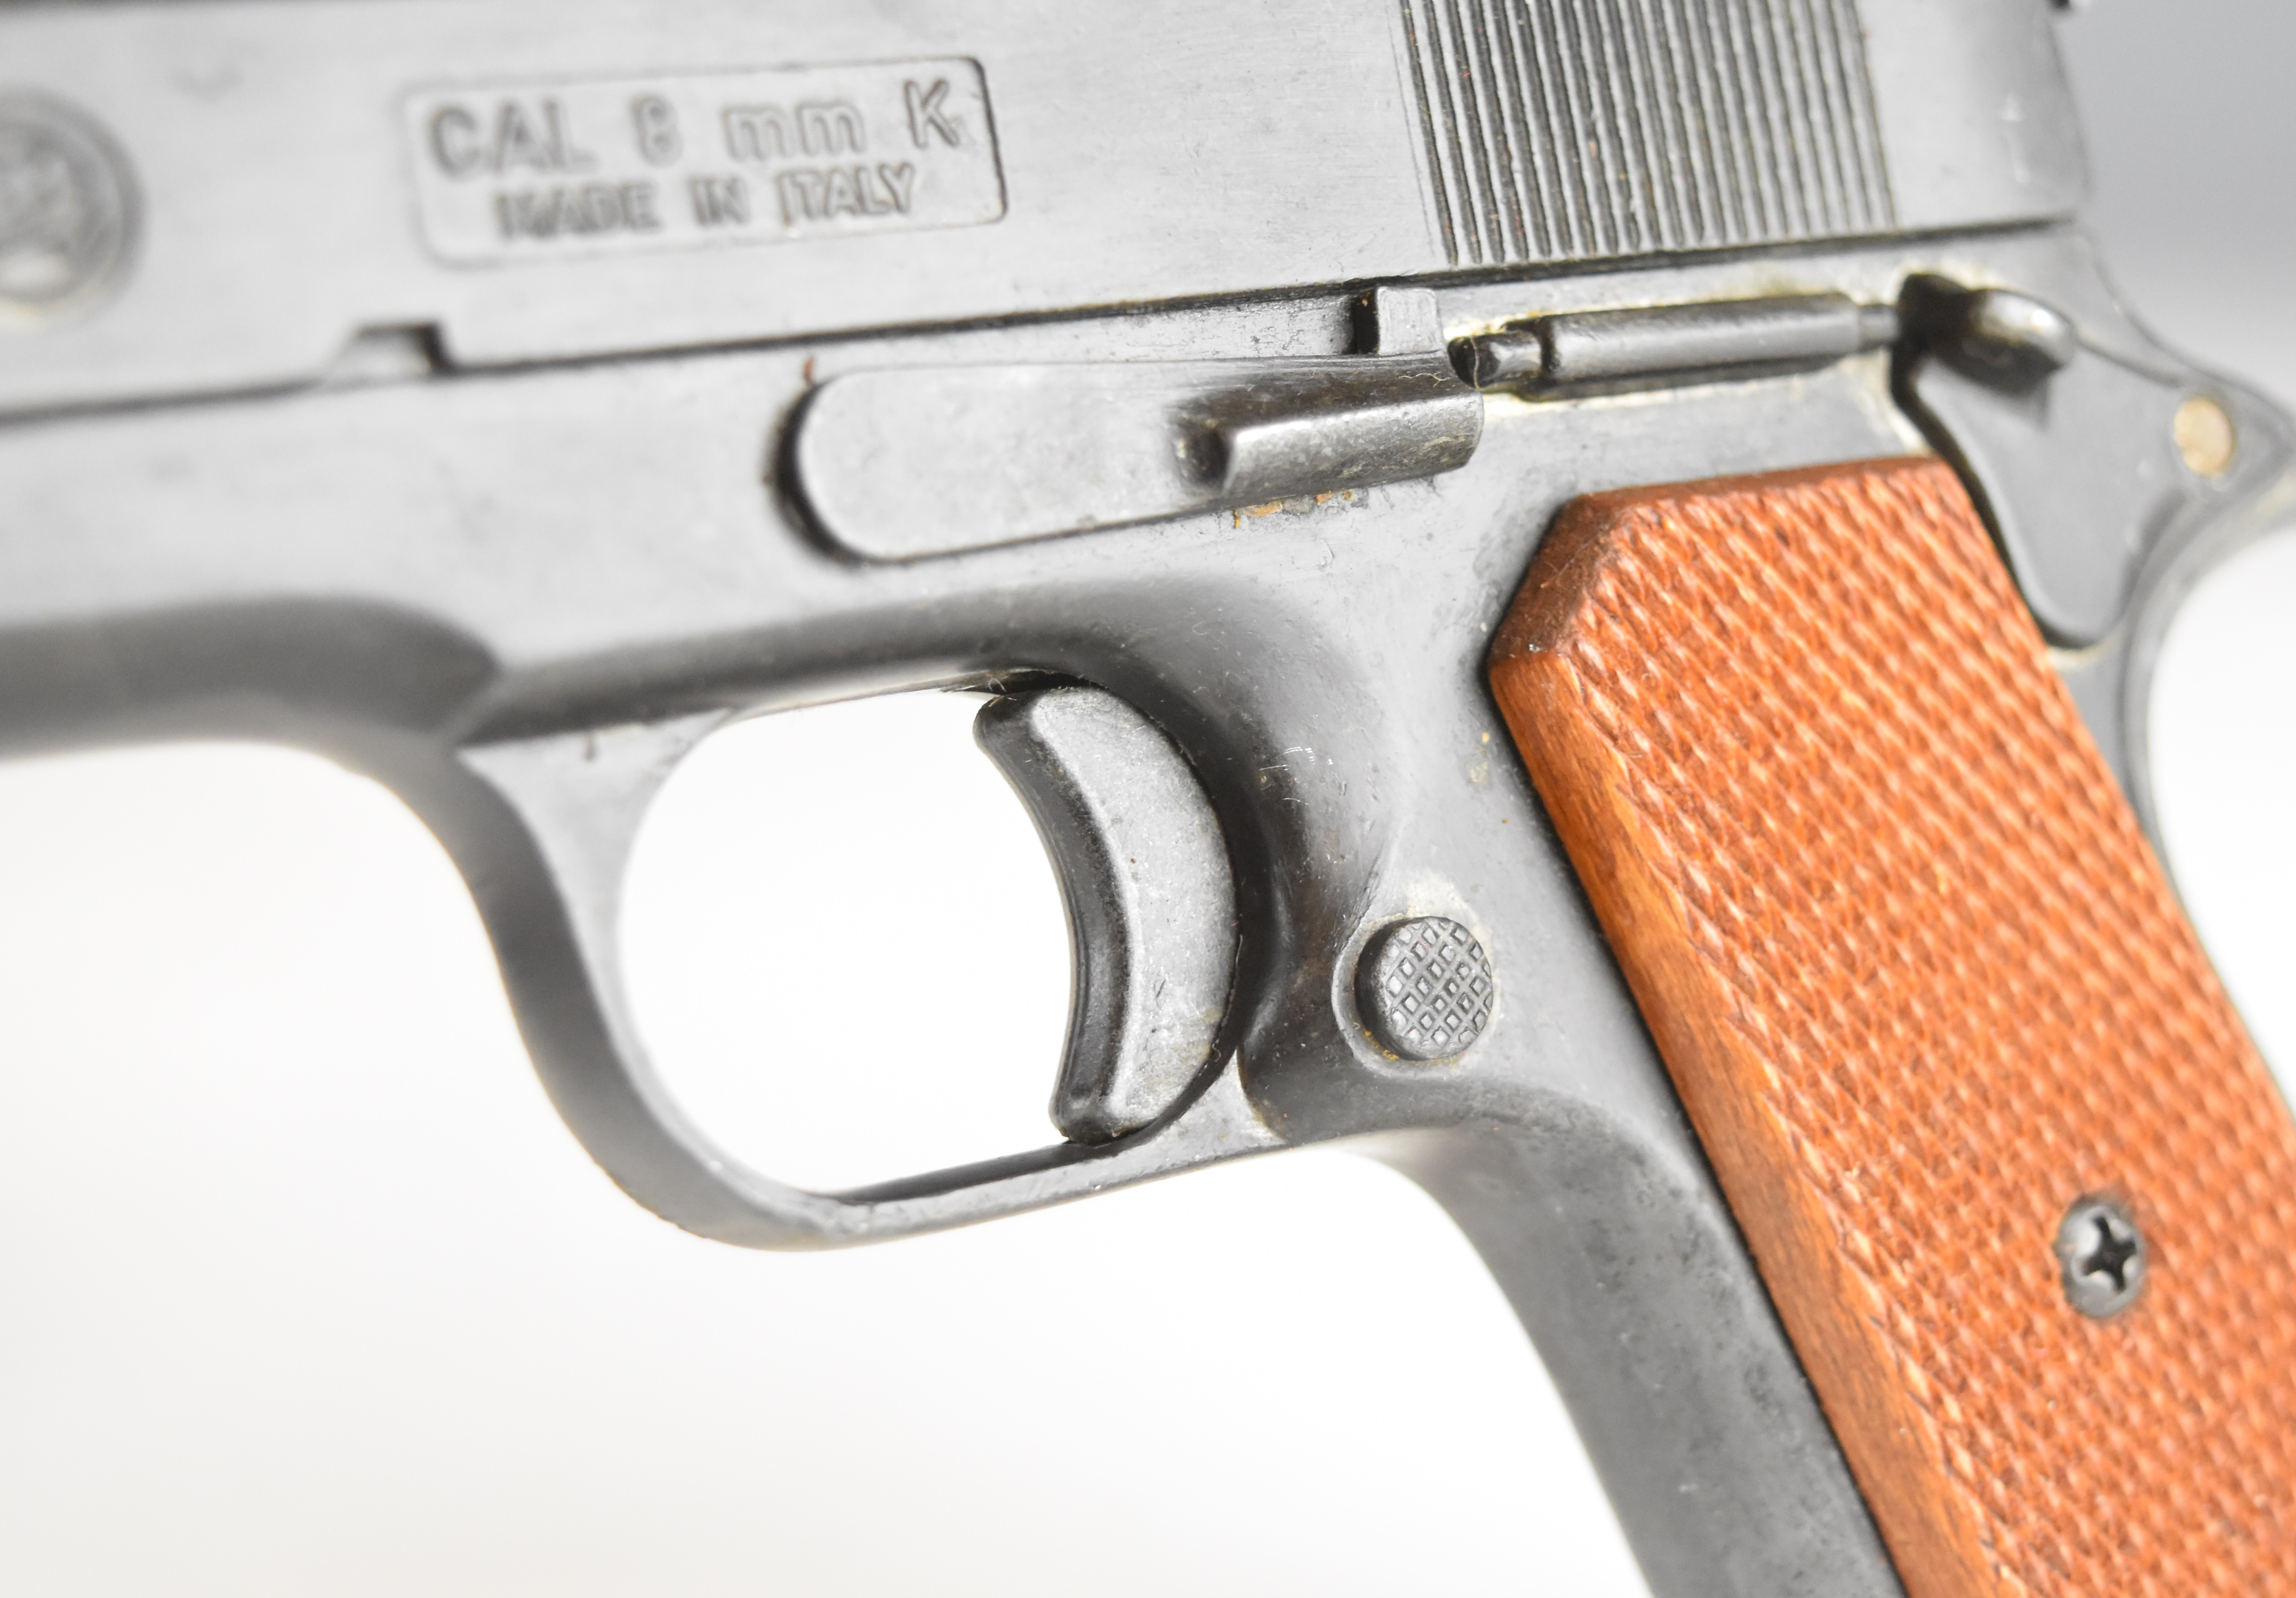 BBM Bruni 8mm blank firing pistol with chequered wooden grips, in original fitted box. - Image 7 of 14